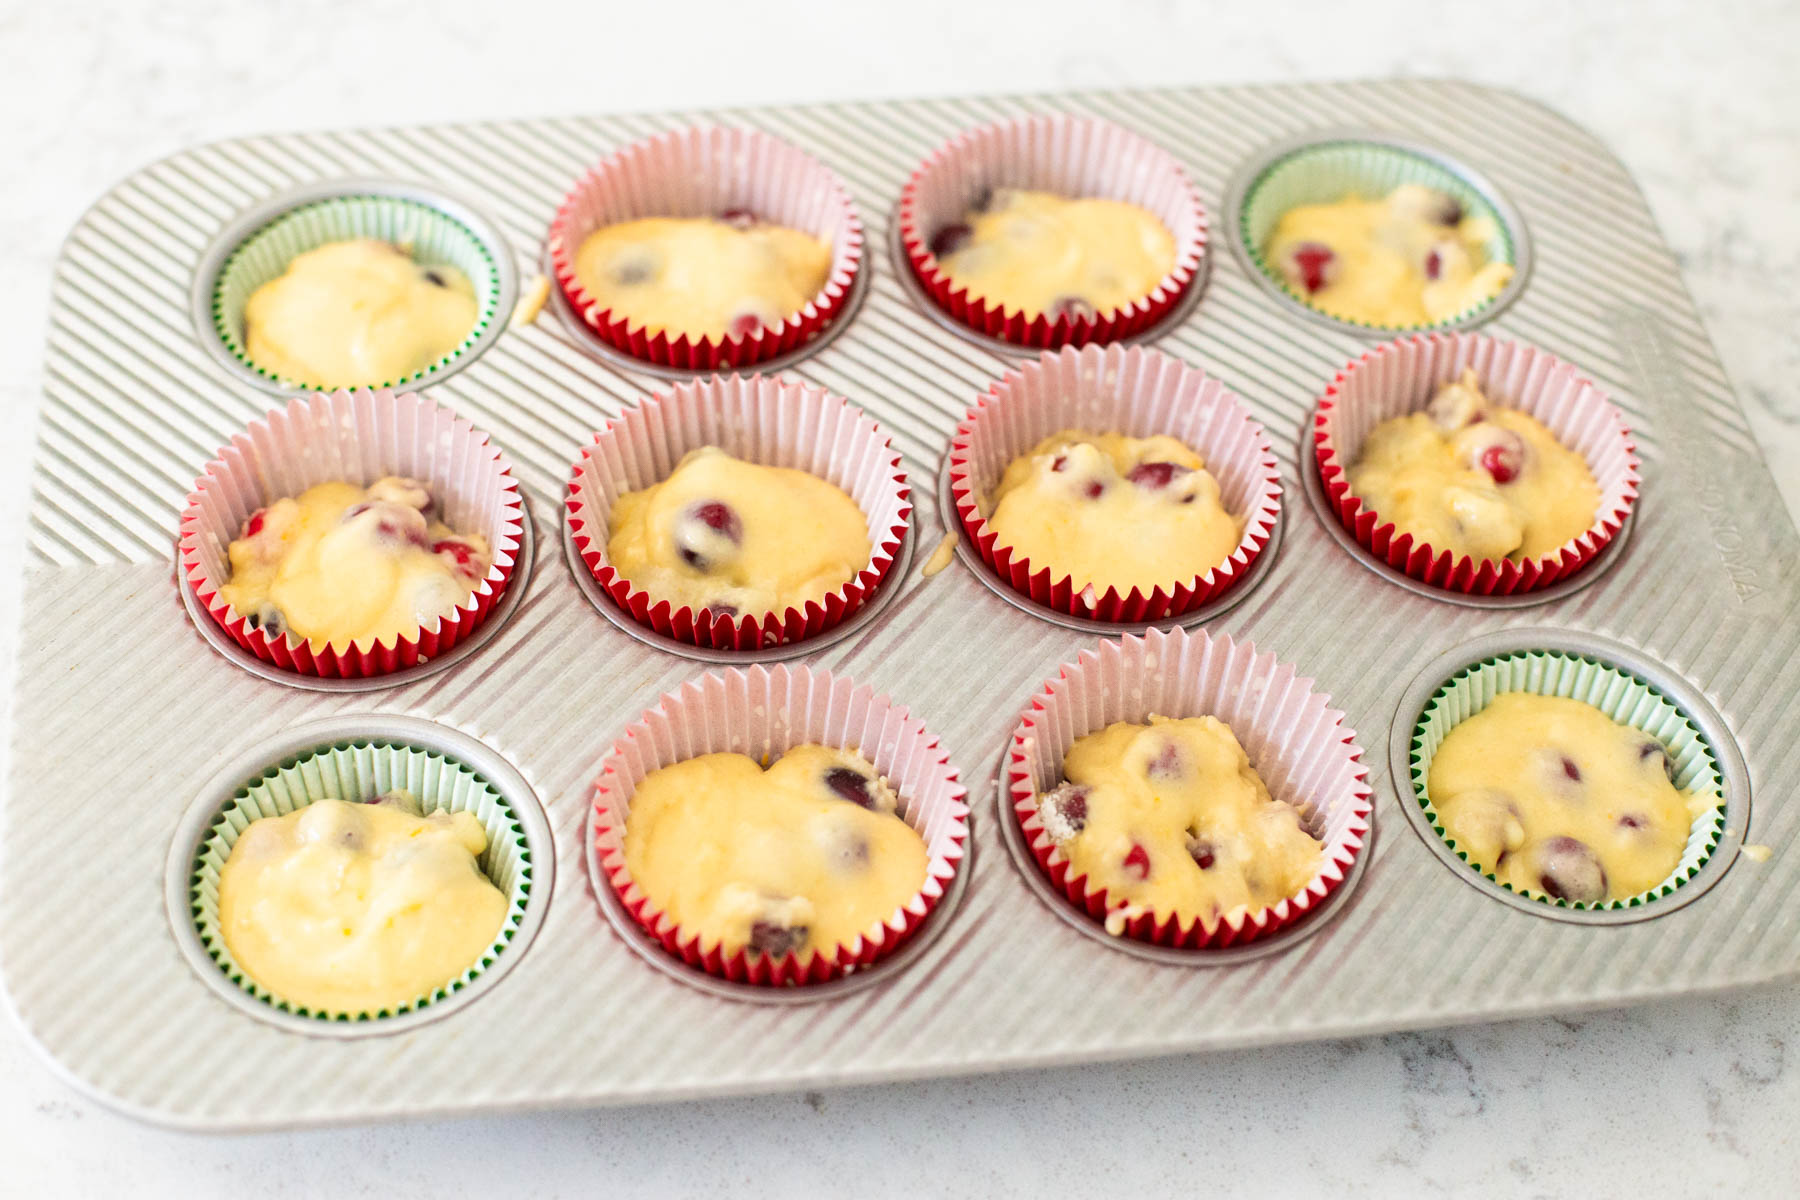 The muffins are in cupcake liners in a muffin tin.